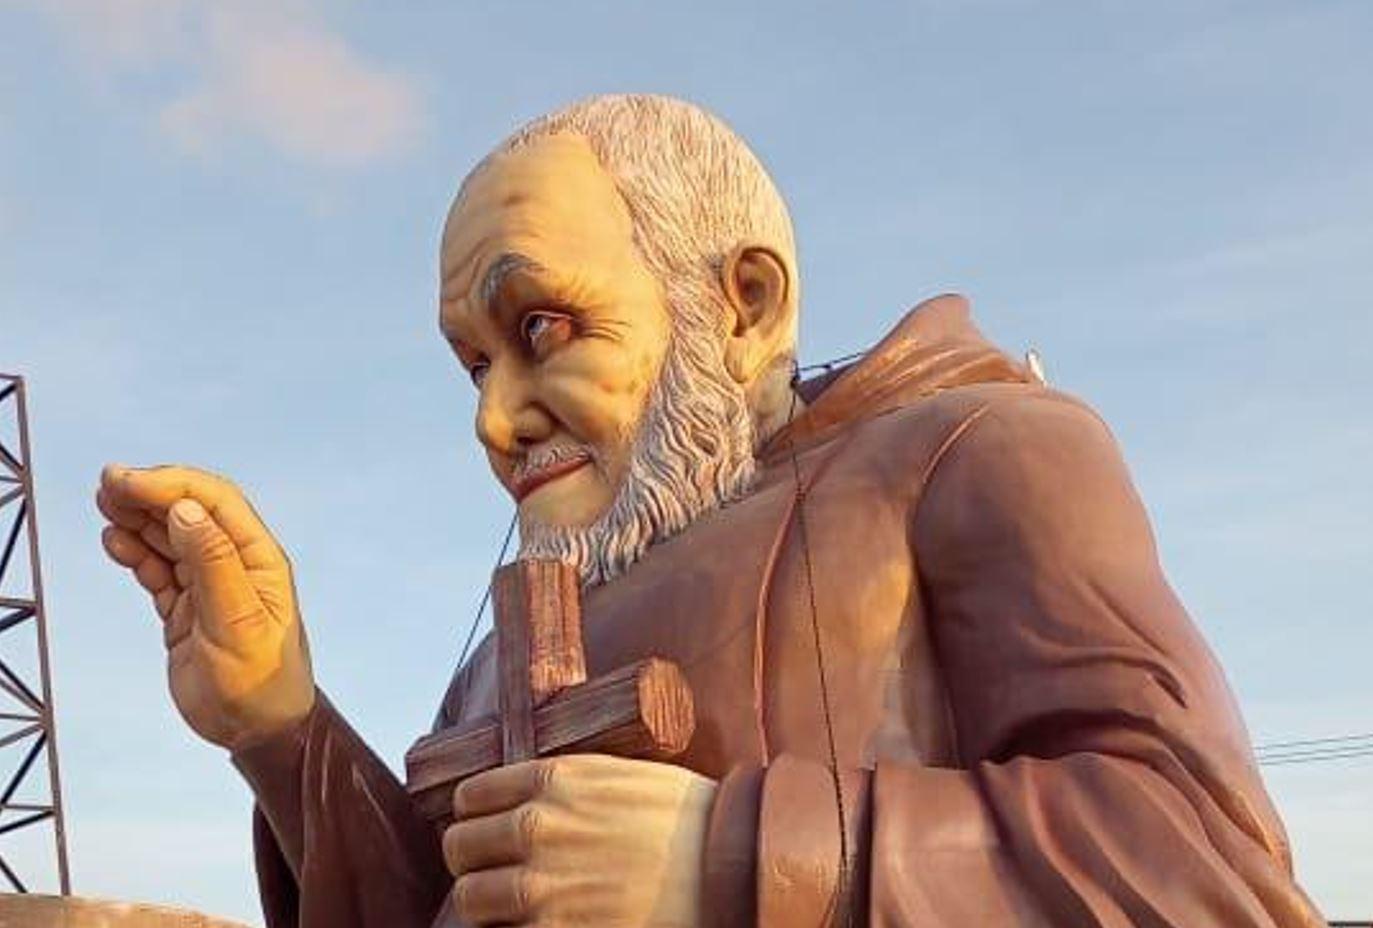 Giant statue of folk saint unveiled in Brazil